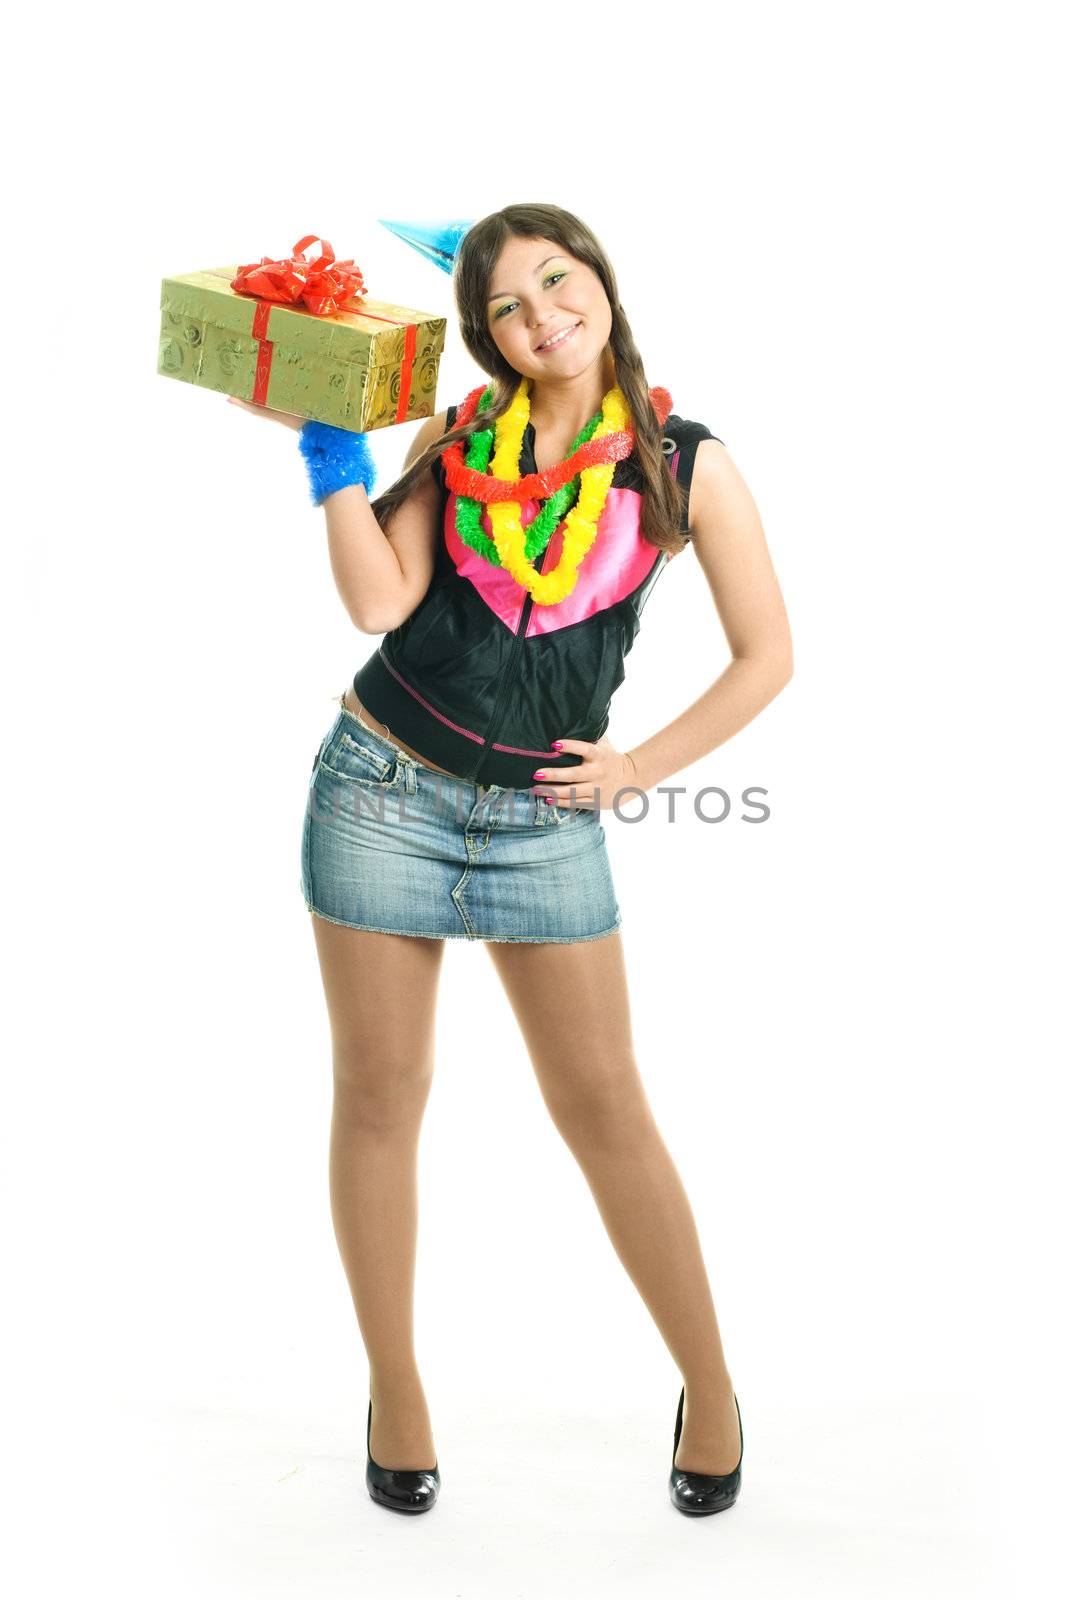 happy young beautiful girl with a present in her hands celebrating birthday